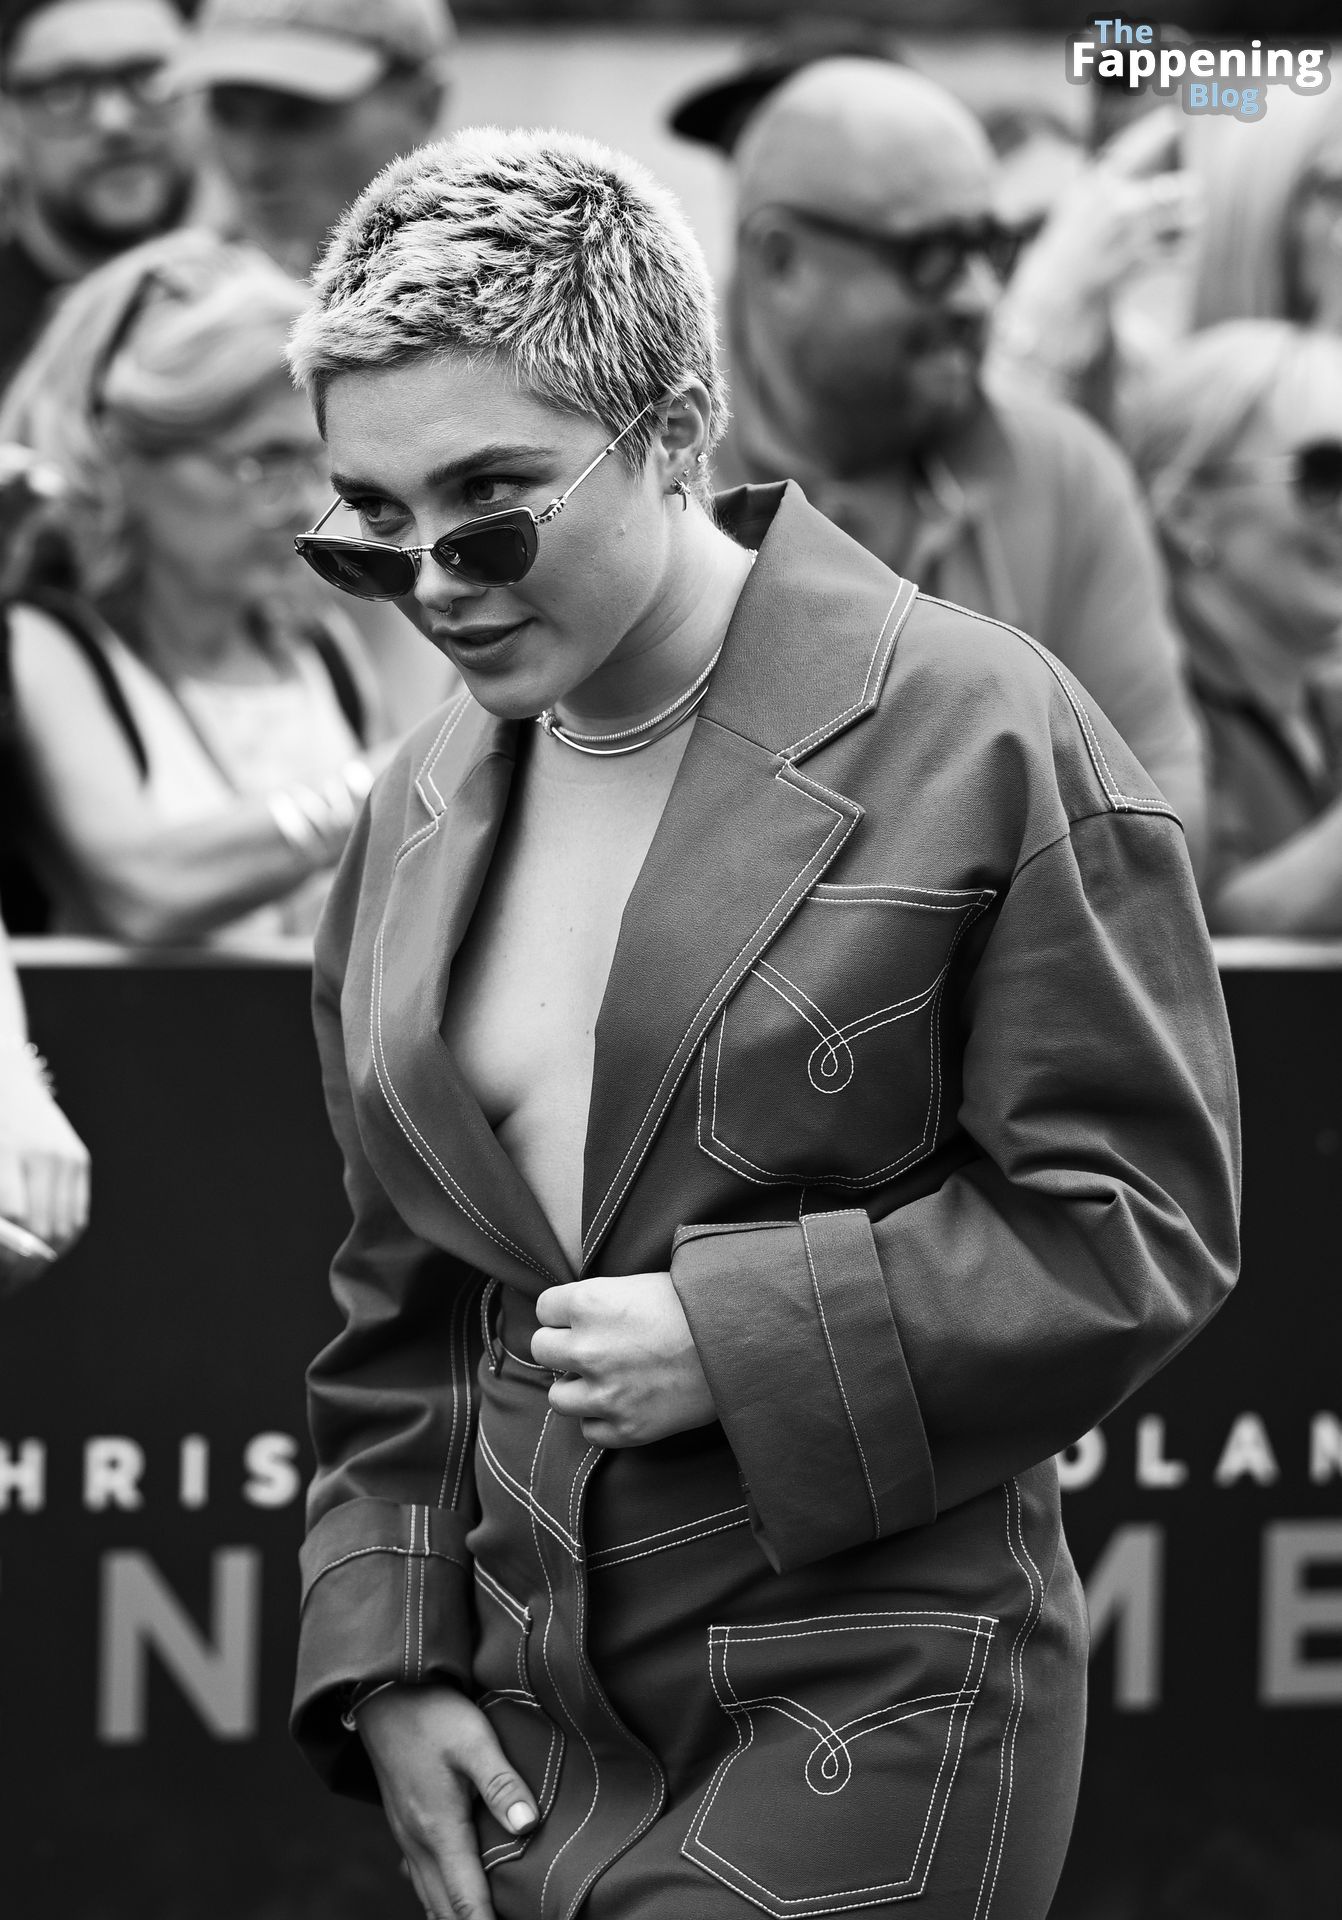 Florence-Pugh-Sexy-The-Fappening-Blog-25.jpg